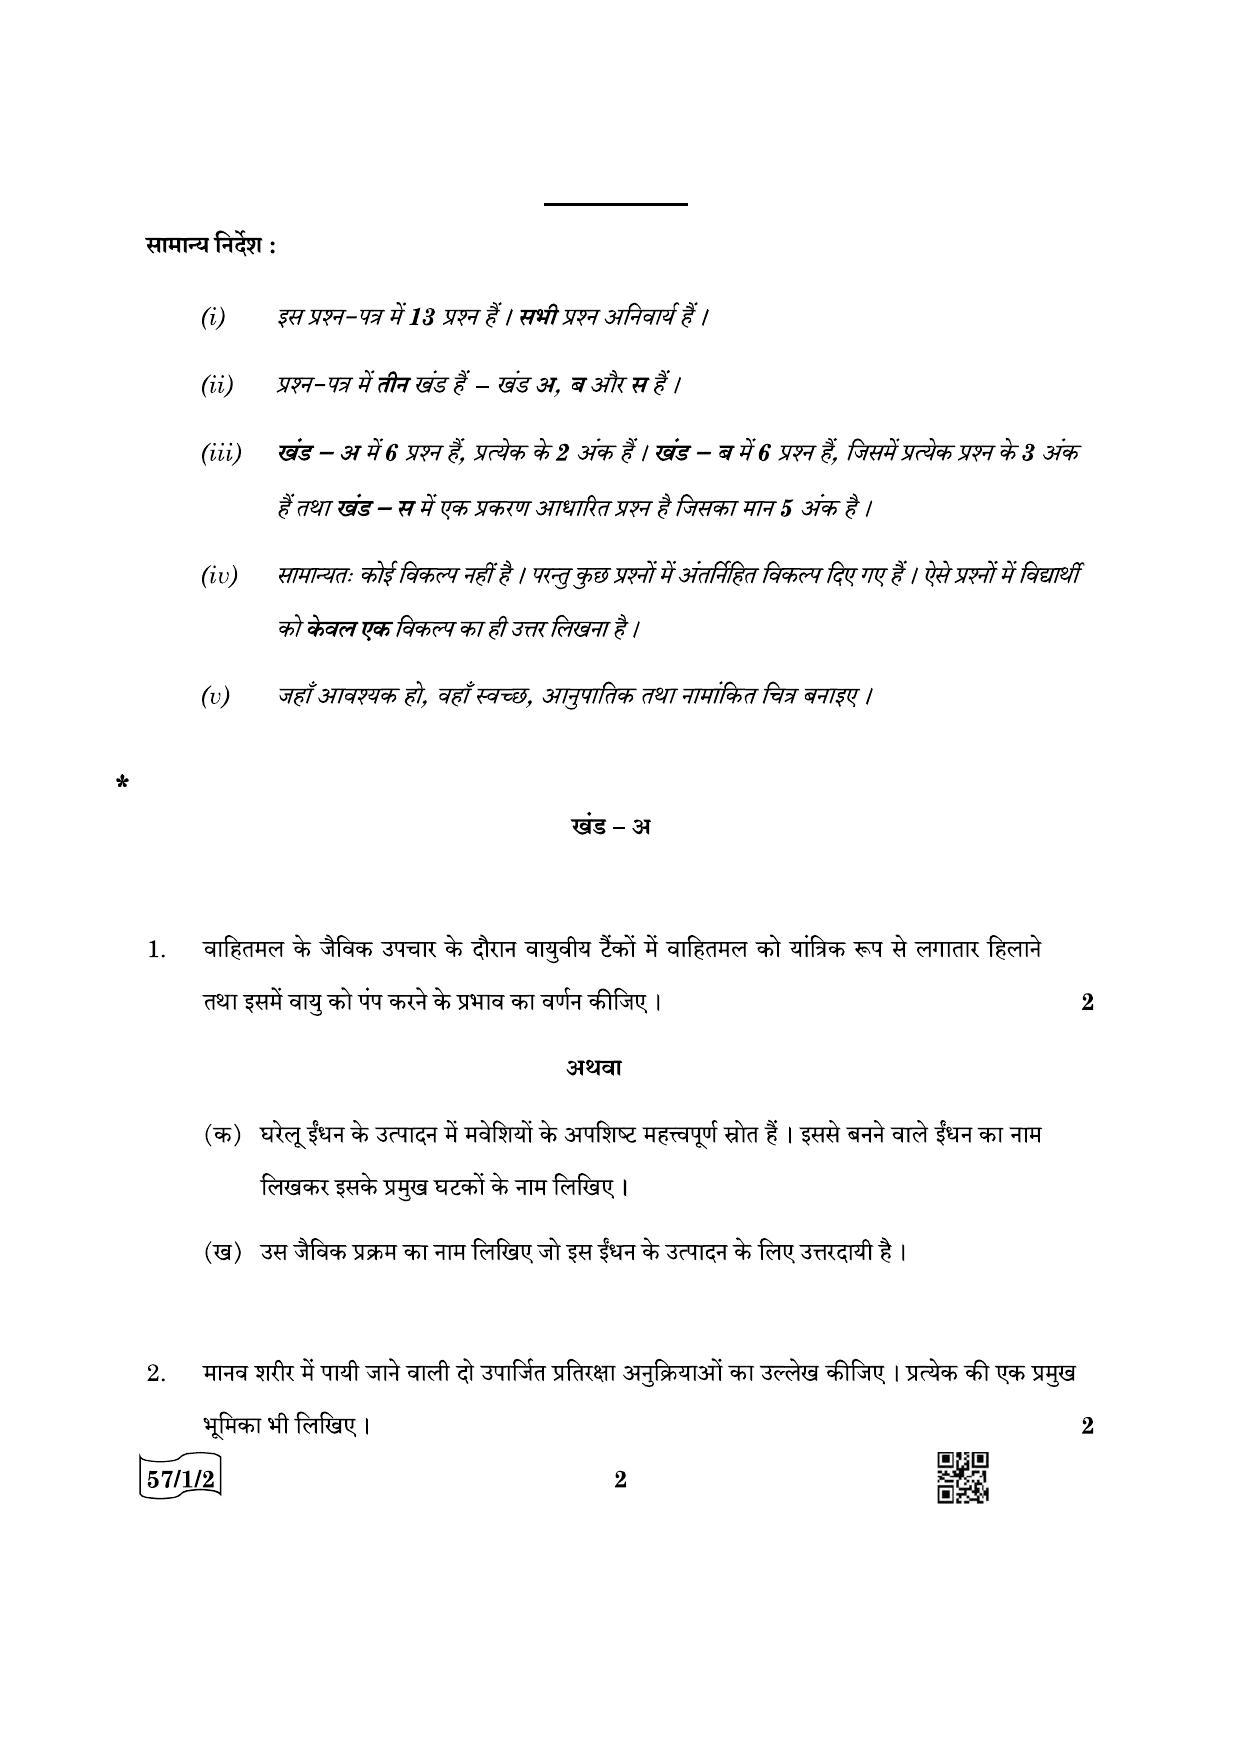 CBSE Class 12 57-1-2 Biology 2022 Question Paper - Page 2